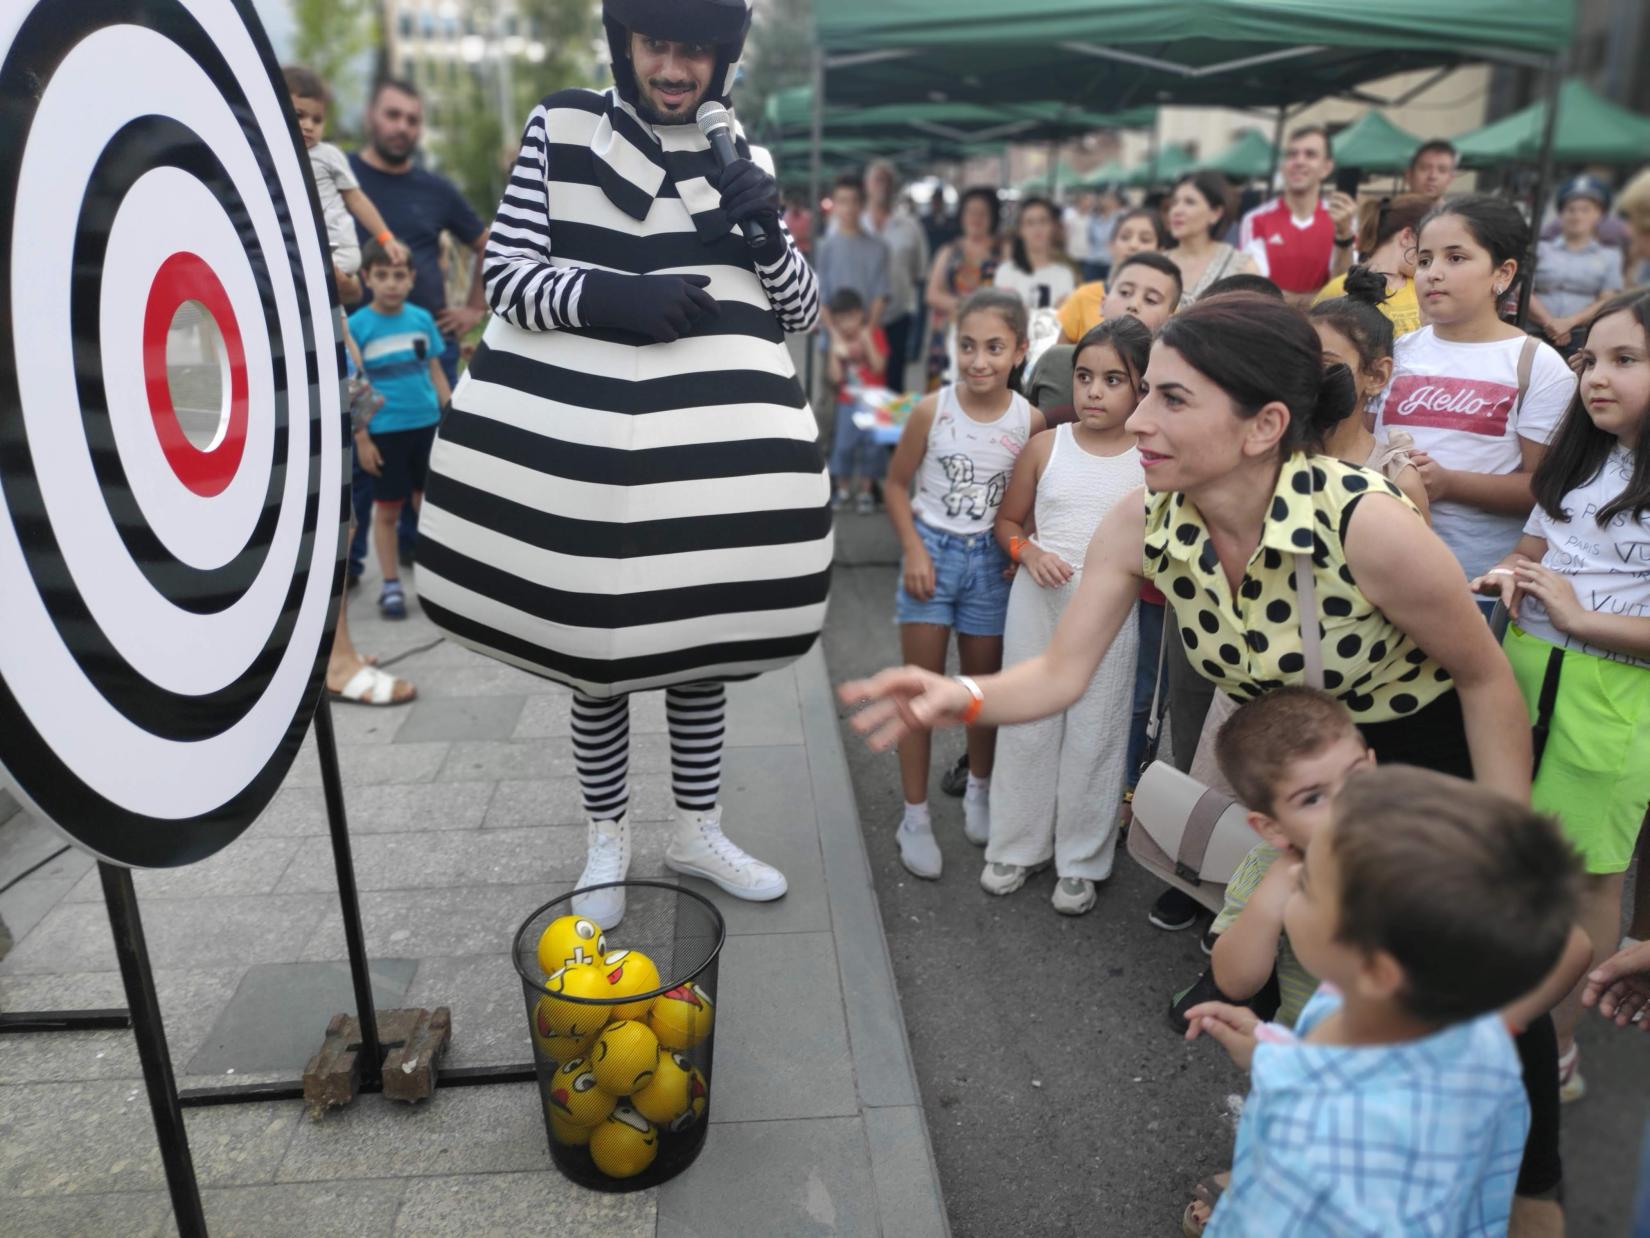 A woman participating in the "Save the Planet SDGs" fun and educational Zebra Game throws a ball into the target.